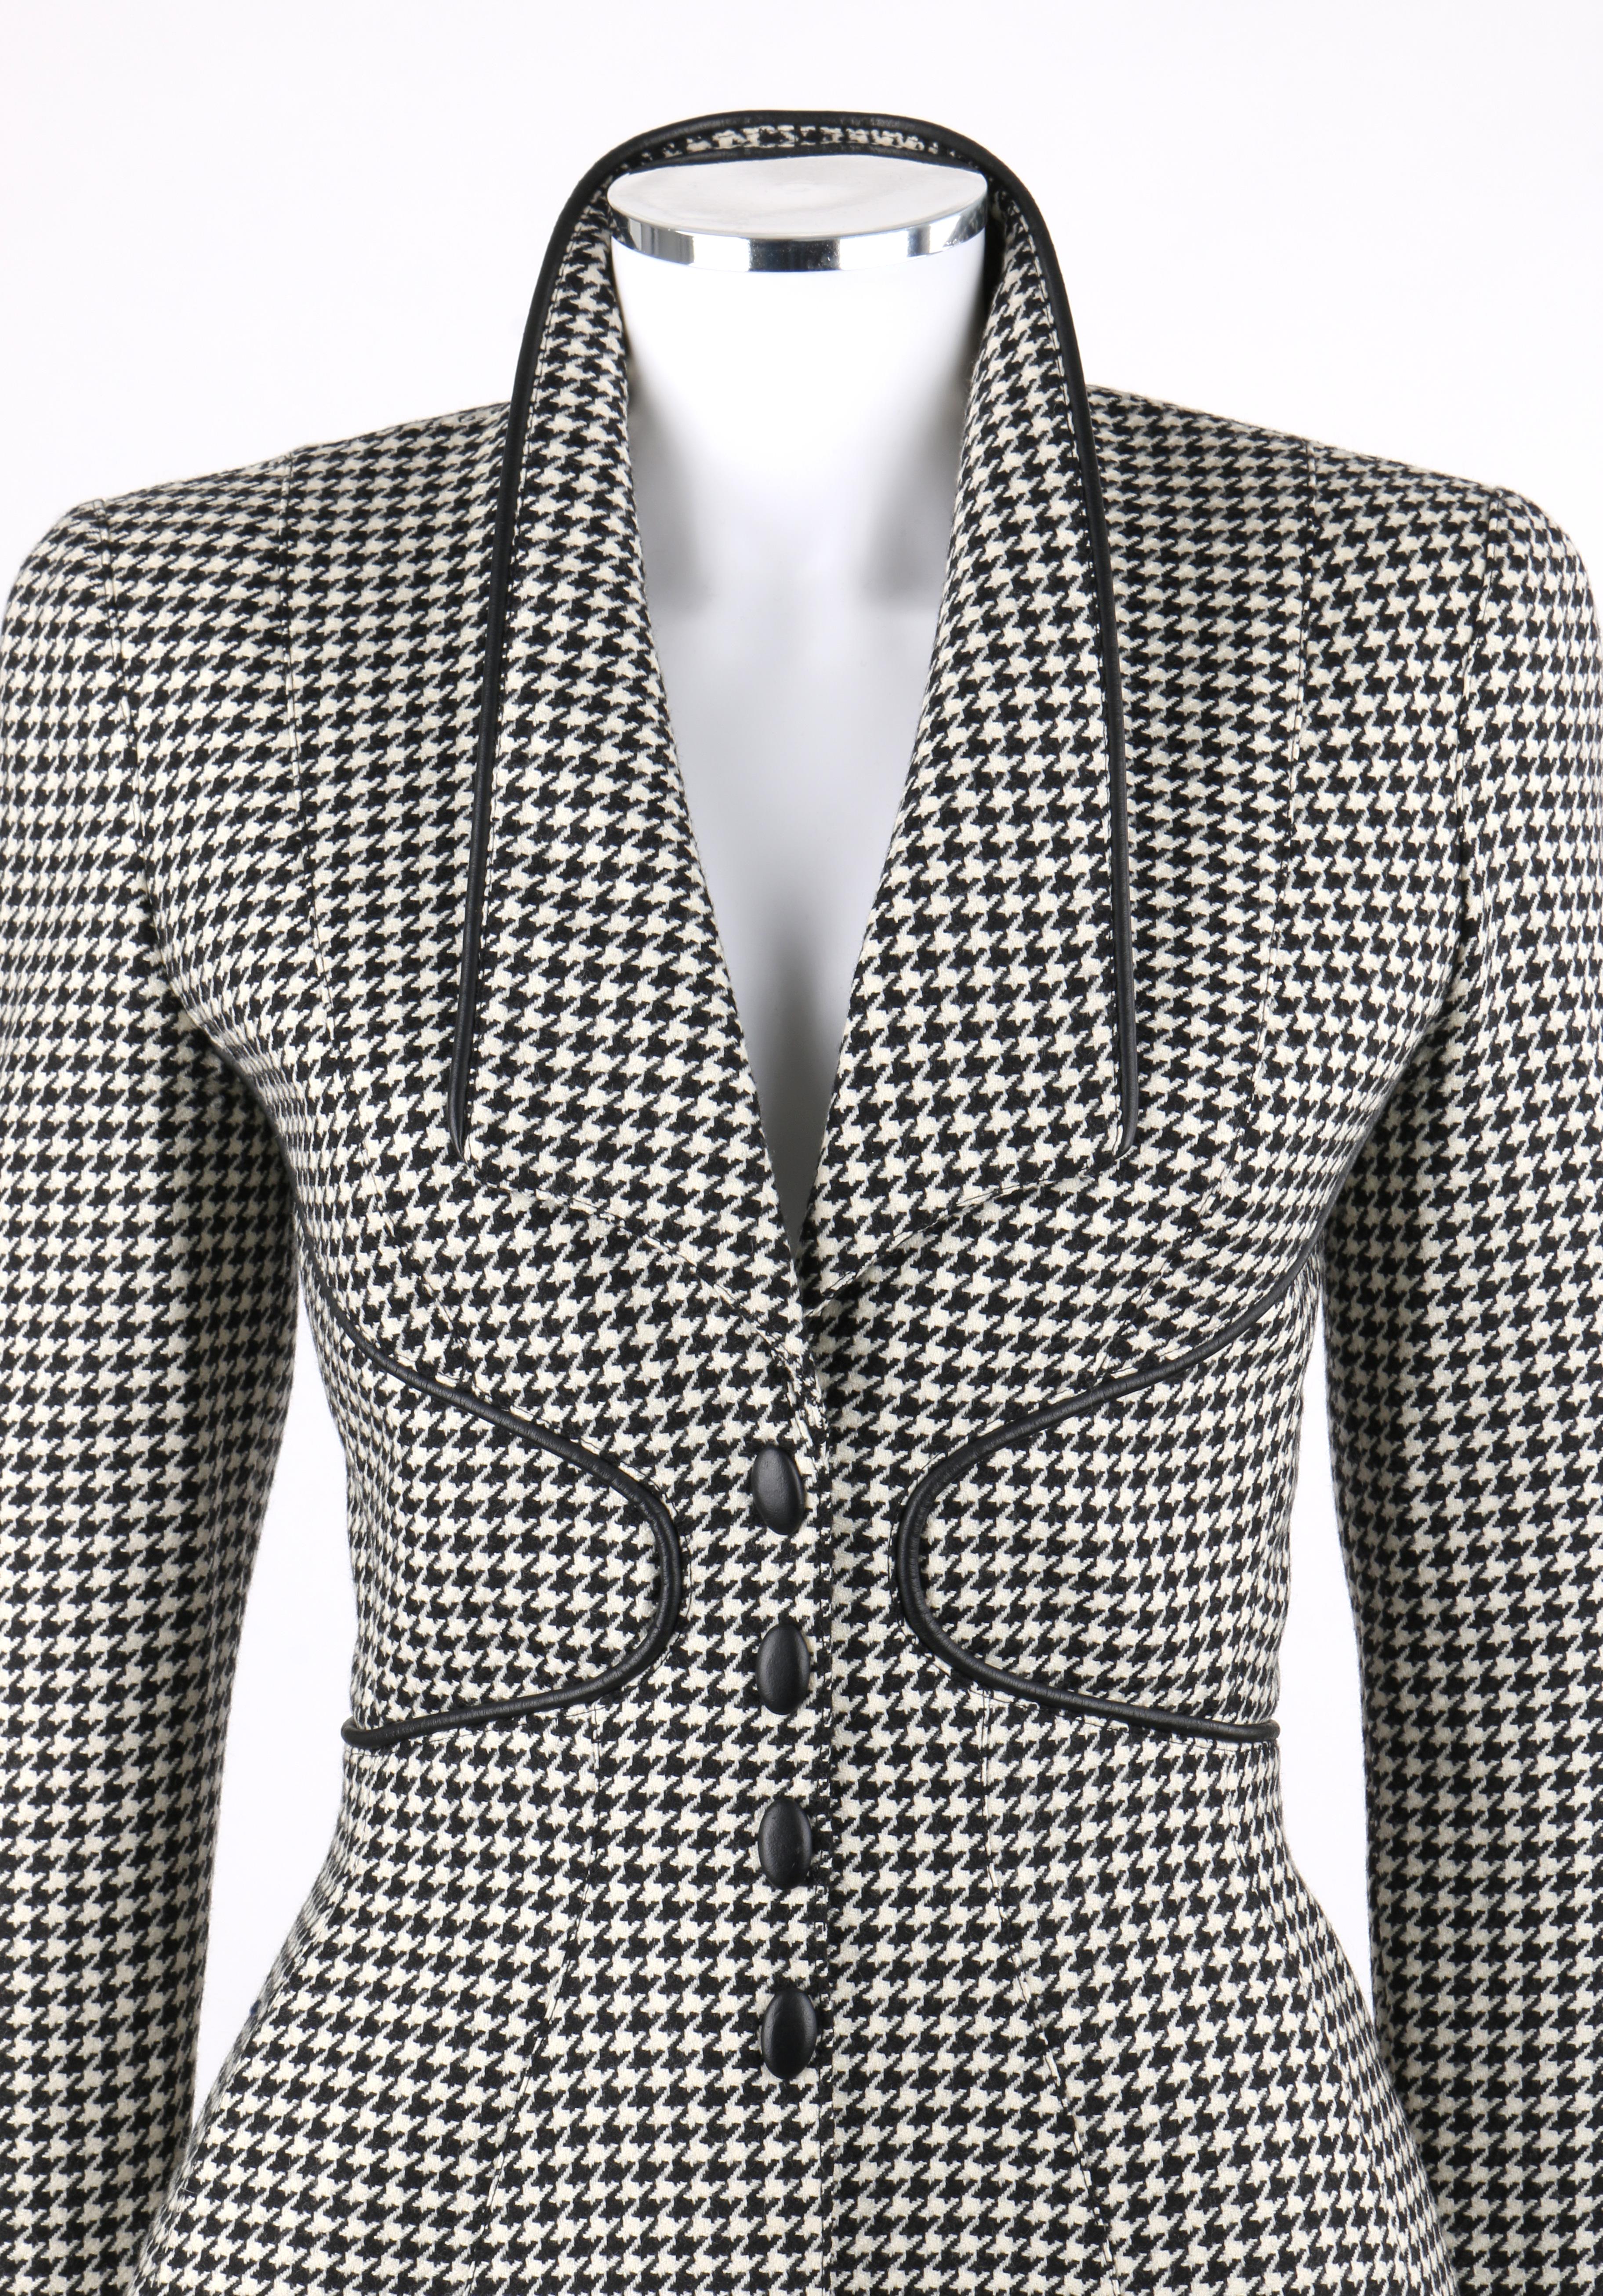 THIERRY MUGLER c.1980’s Black White Houndstooth Dogtooth Fitted Wool Blazer 
 
Circa: 1980’s 
Label(s):  
Style: Blazer 
Color(s): Black, white 
Lined: No
Marked Fabric Content: Exterior: 100% Wool. Lining: 100% Acetate. 
Additional Details /